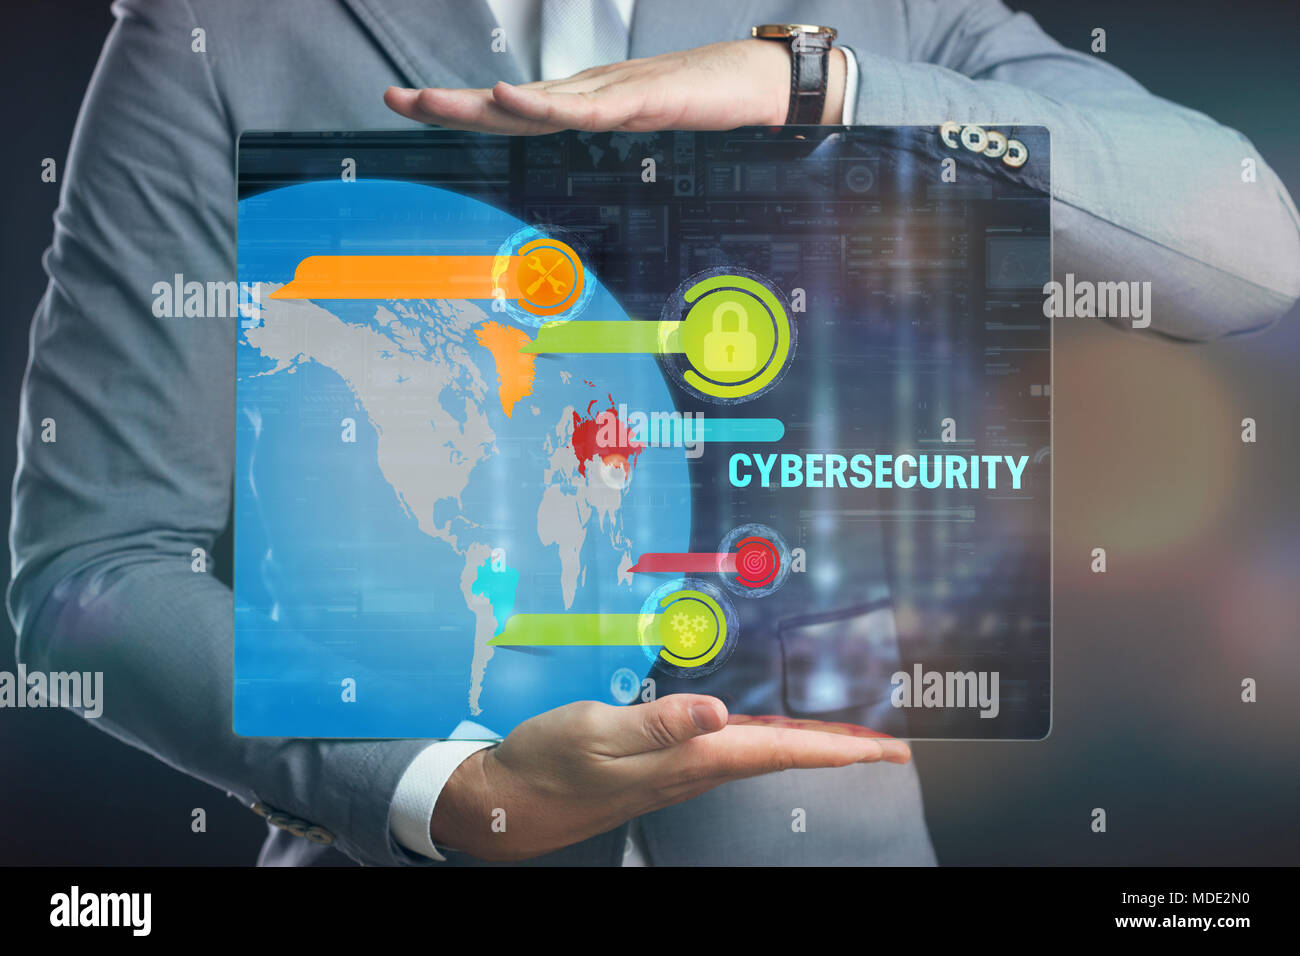 Business, technology, internet and networking concept. Young businessman working on his laptop, select the icon security on the virtual display. Stock Photo